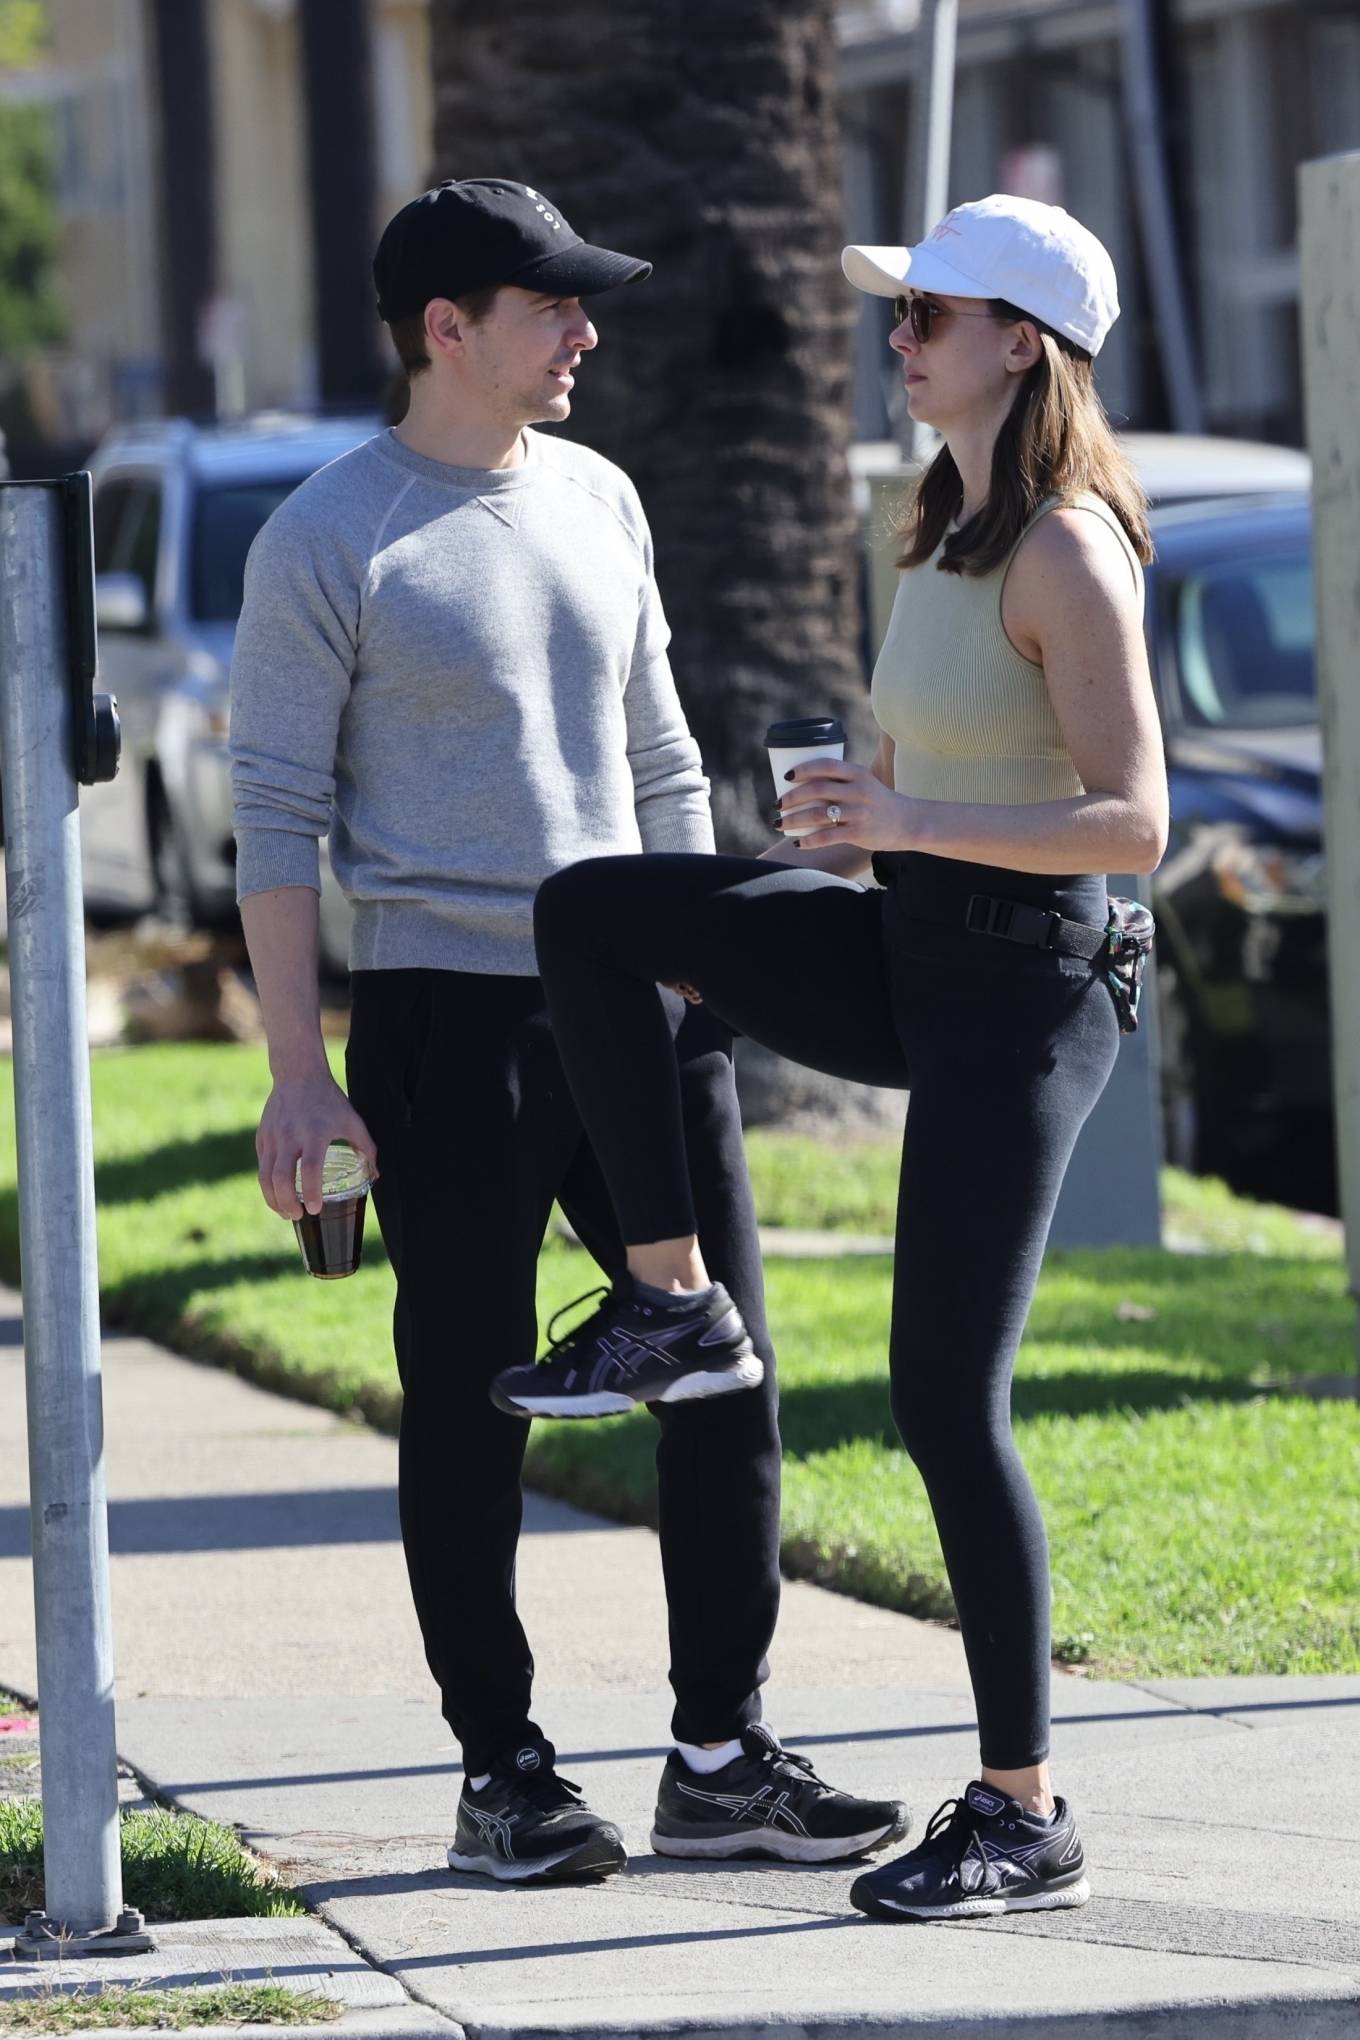 Alison Brie 2021 : Alison Brie – With Dave Franco in athleisure out in Los Angeles-05